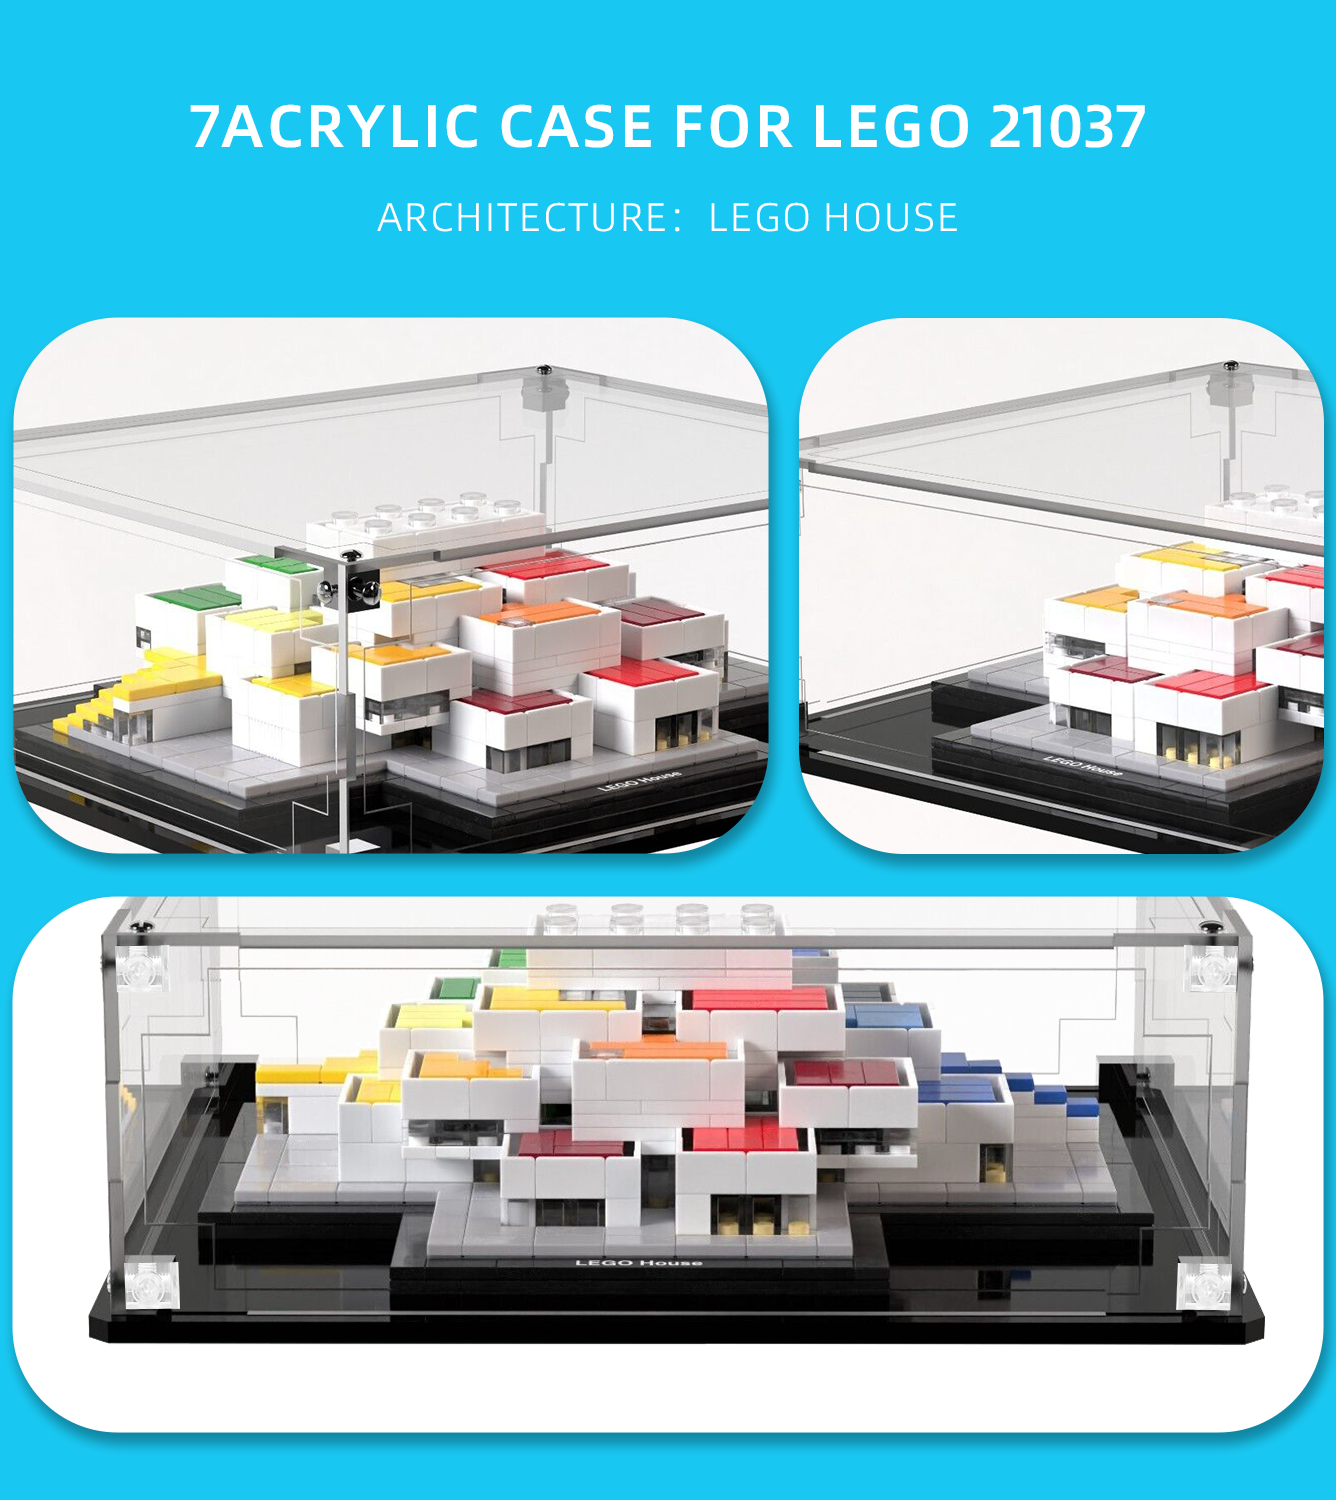 Display Case for Lego Architecture LEGO House 21037